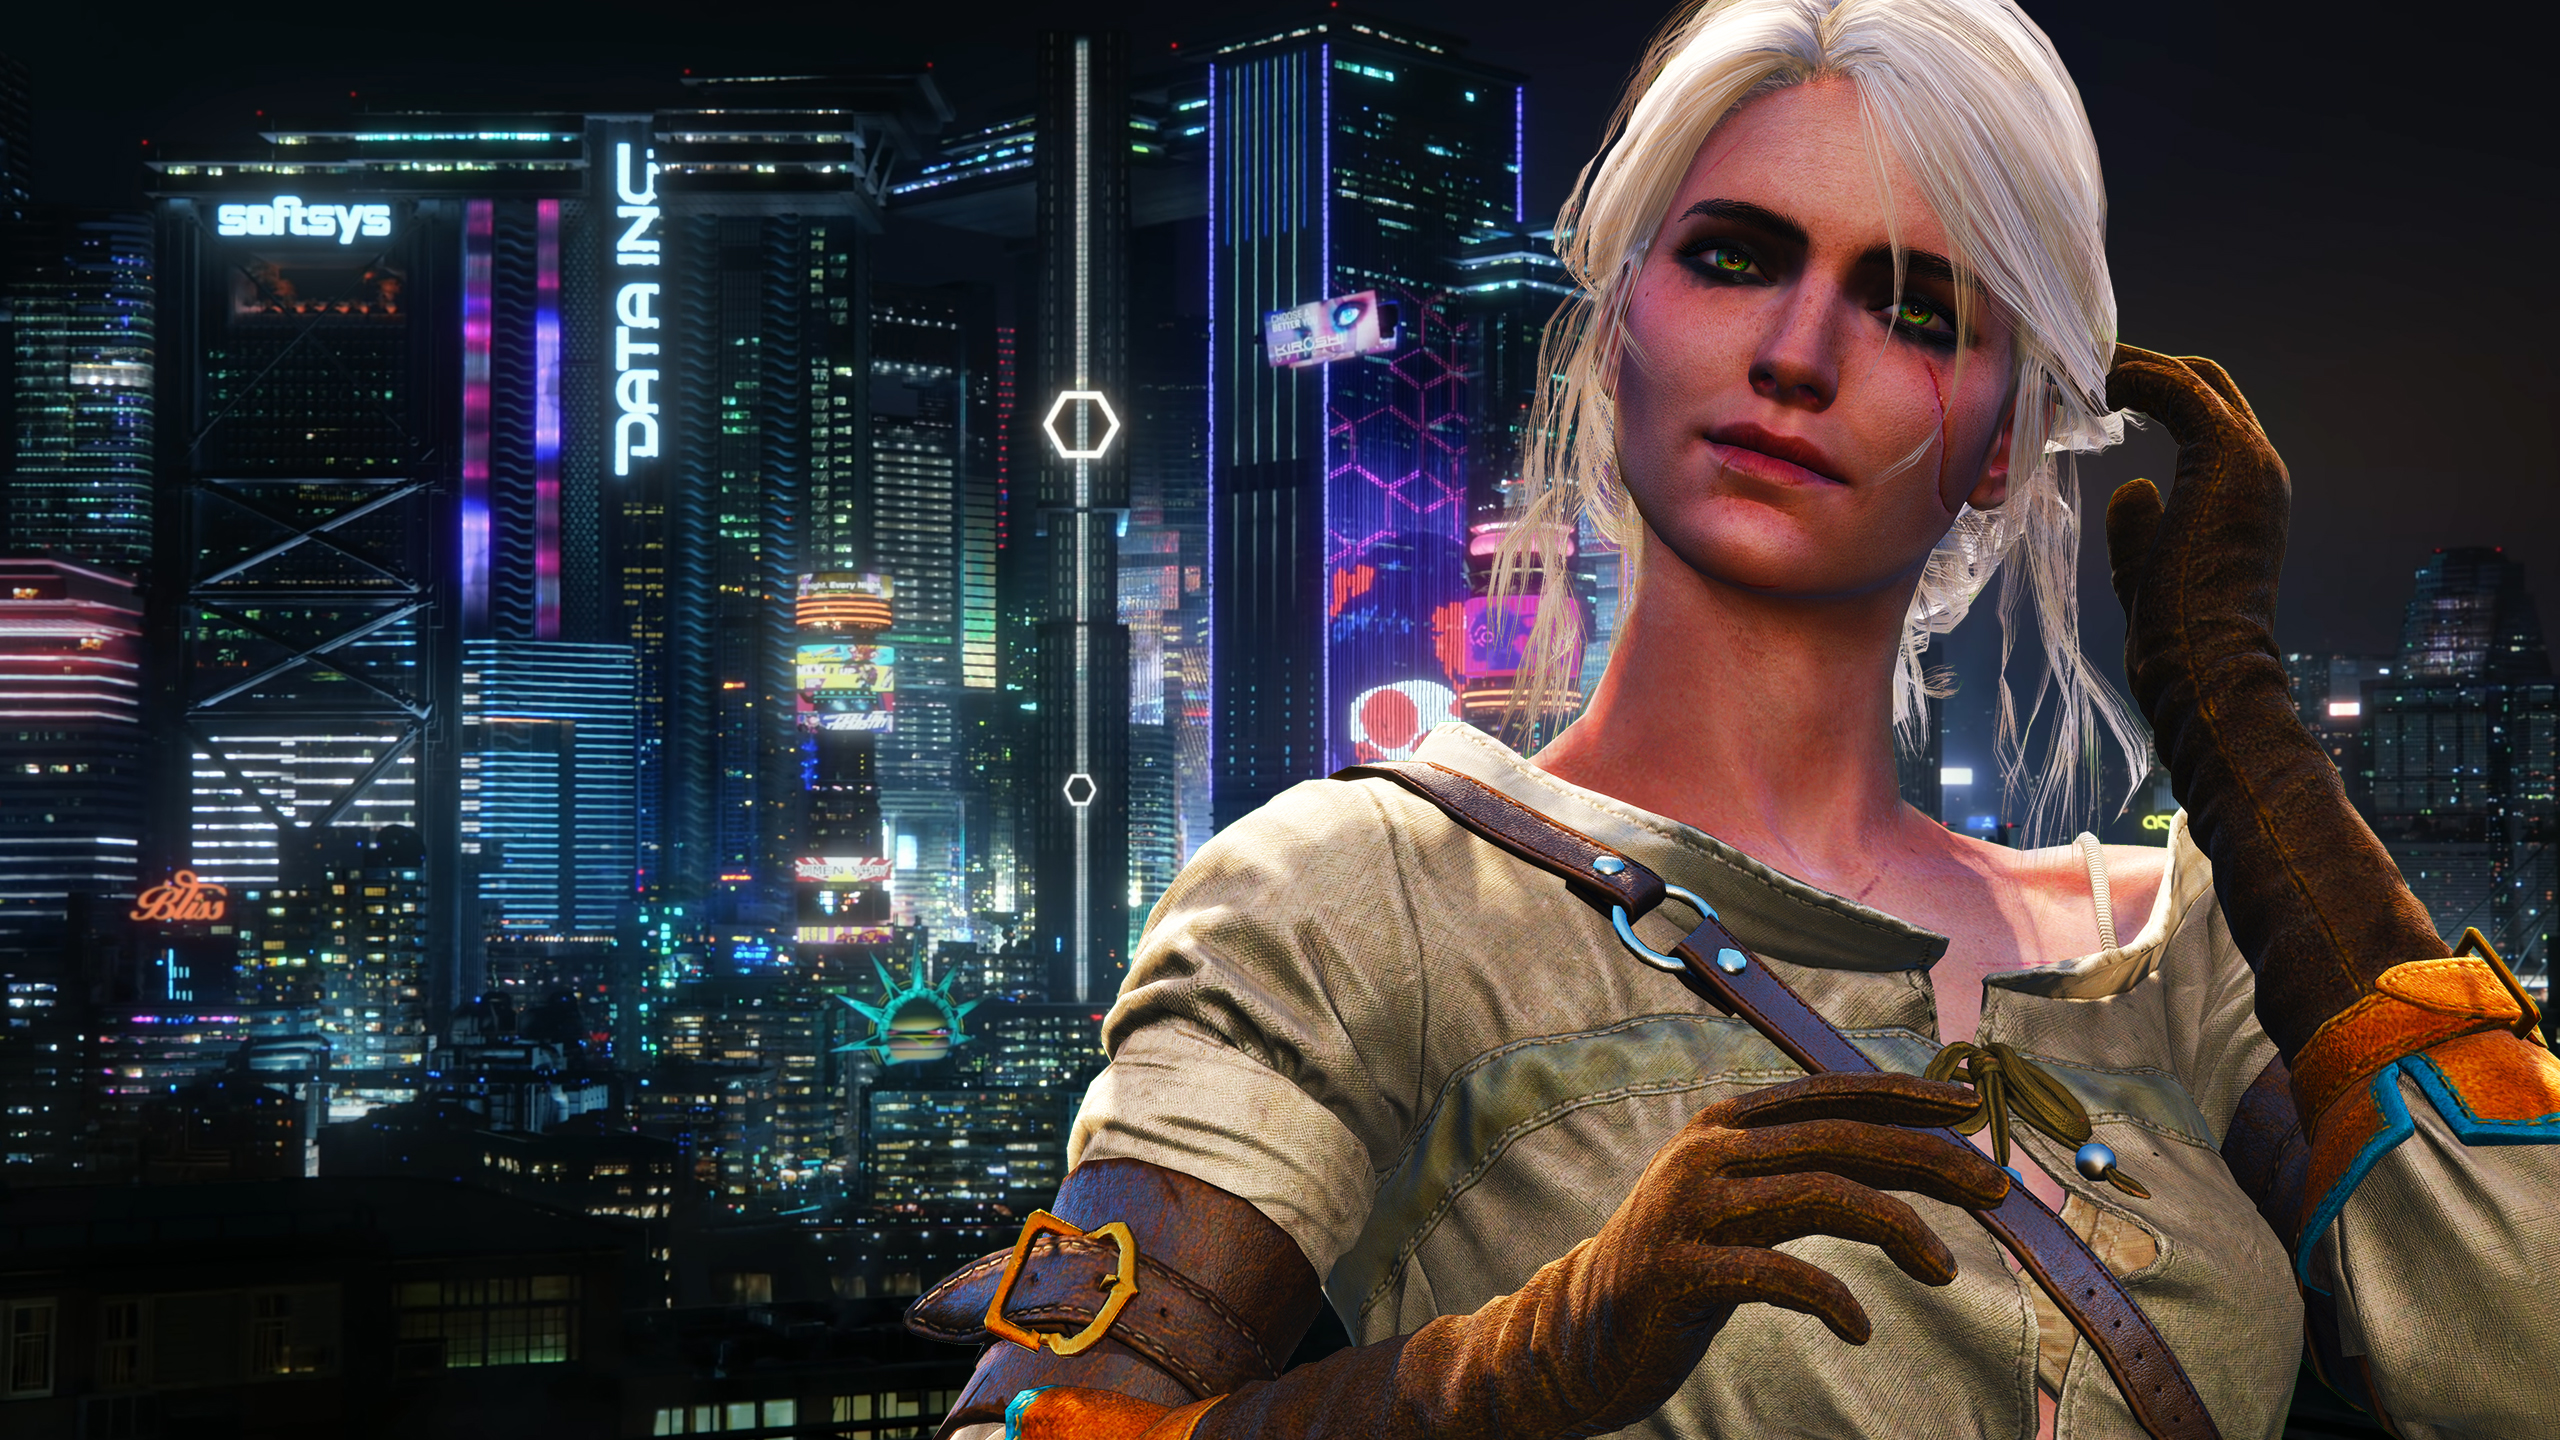 CD Projekt wants the Cyberpunk series to experience ‘a similar evolution’ to The Witcher games